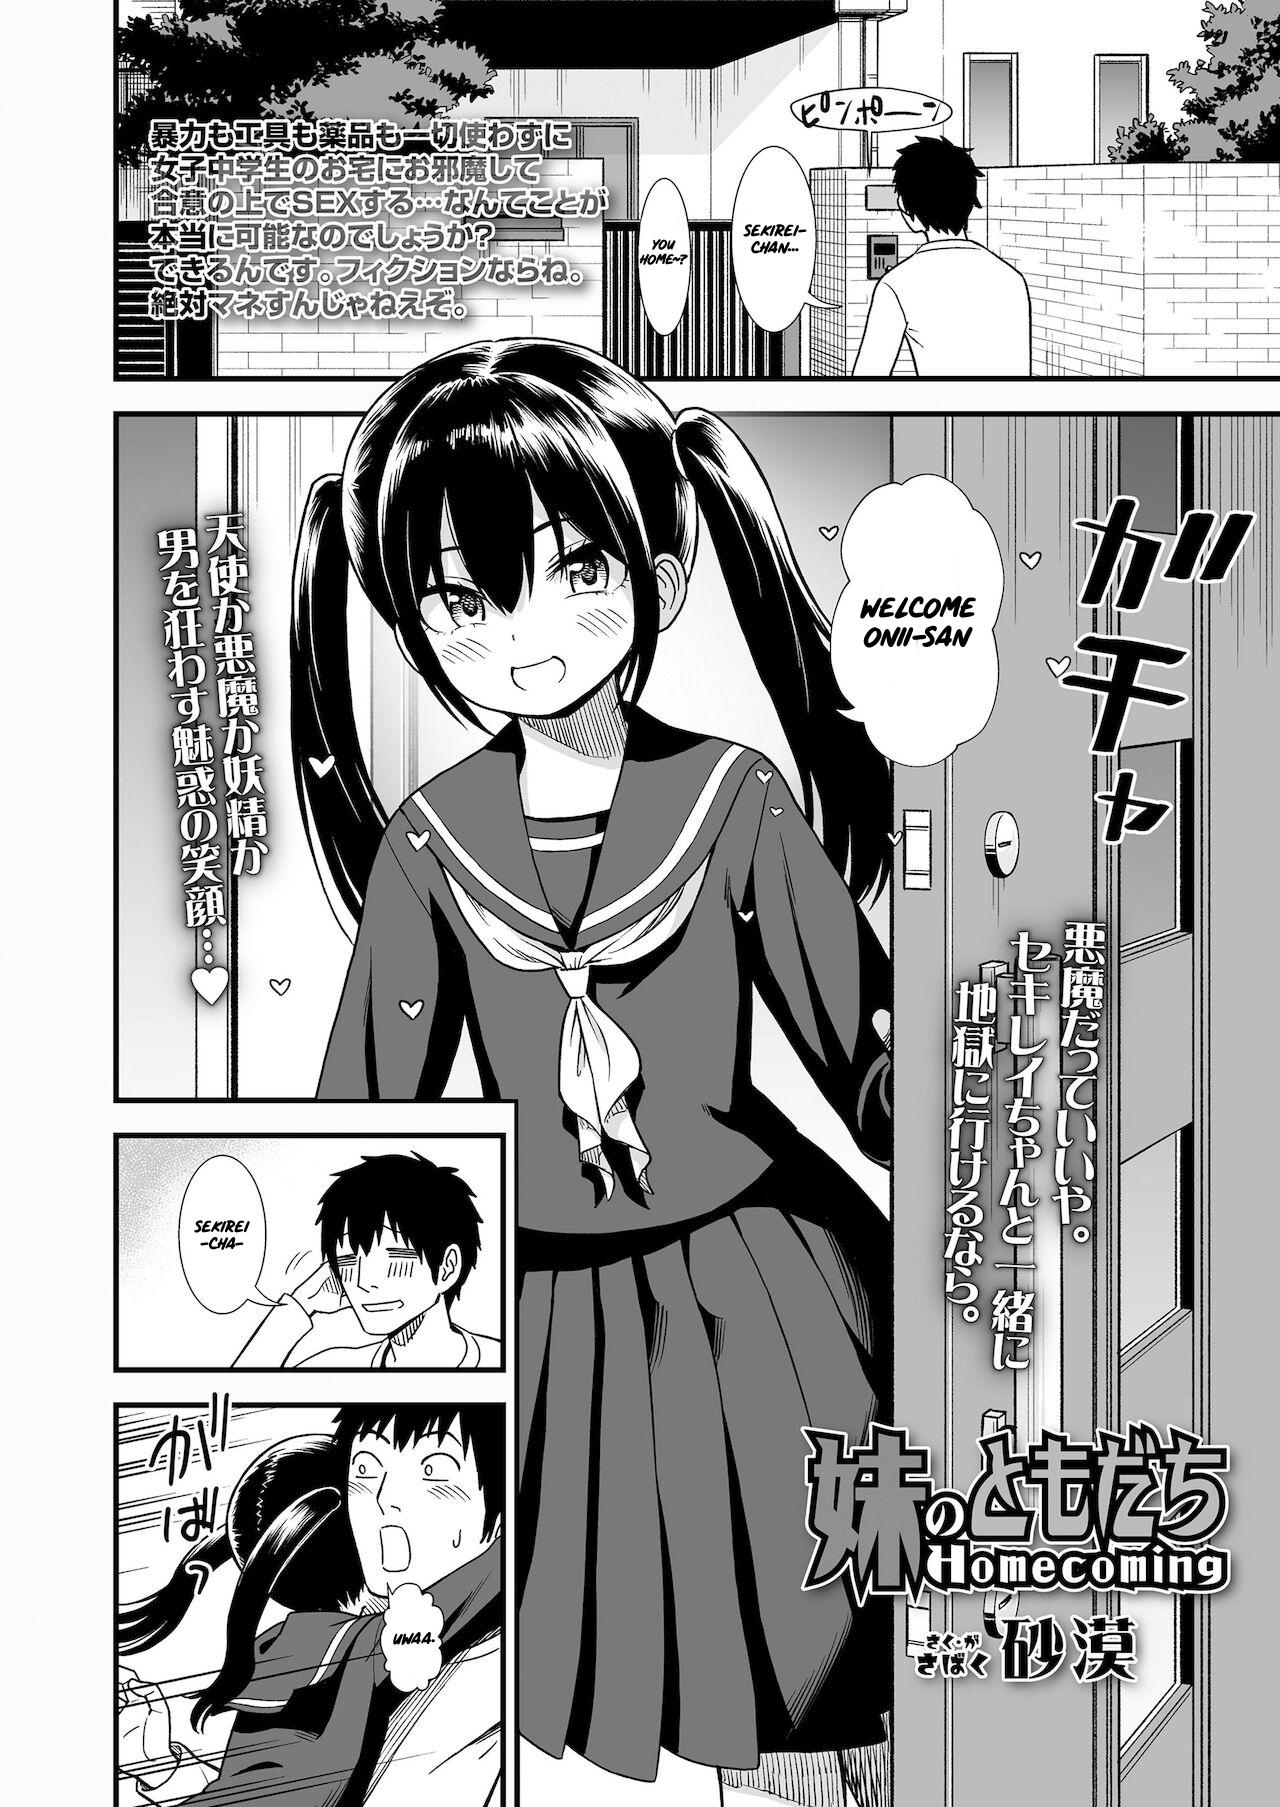 Tiny Imouto no Tomodachi Homecoming | My Little Sister's Friend Homecoming Cuck - Page 2